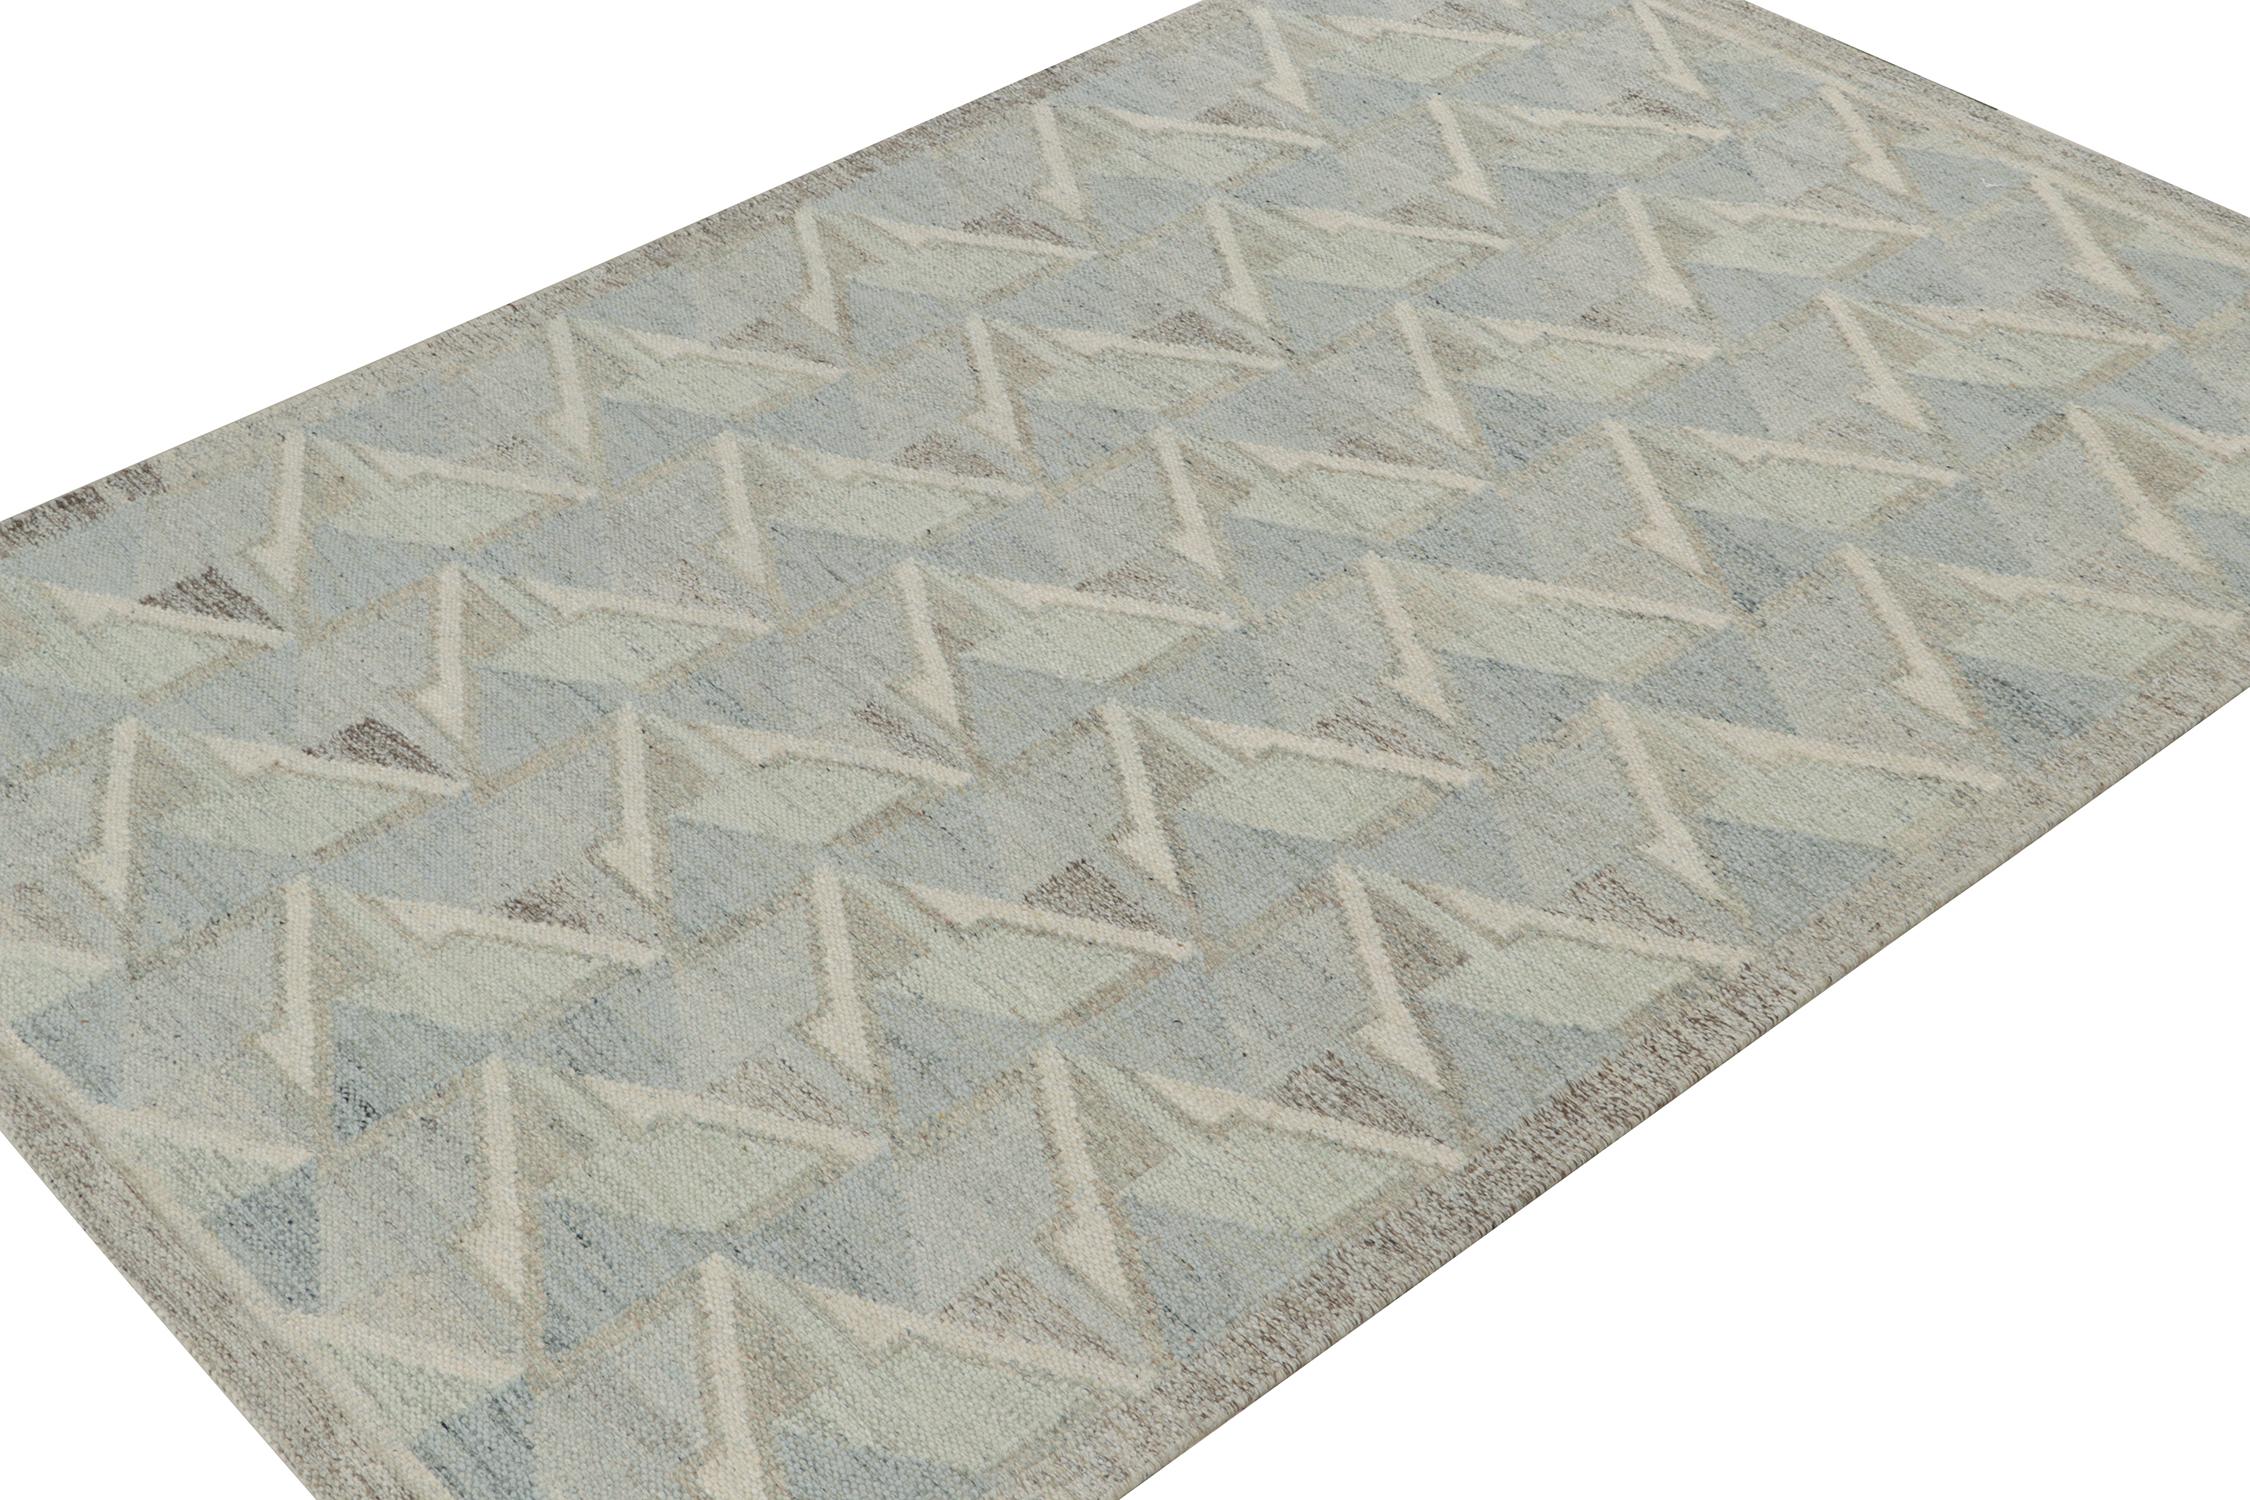 A smart 6x9 Swedish style kilim from our award-winning Scandinavian flat weave collection. Handwoven in wool. 
On the Design: 
This rug enjoys geometric patterns in the most complementary, cool blue, white and gray tones and soothing repetition.